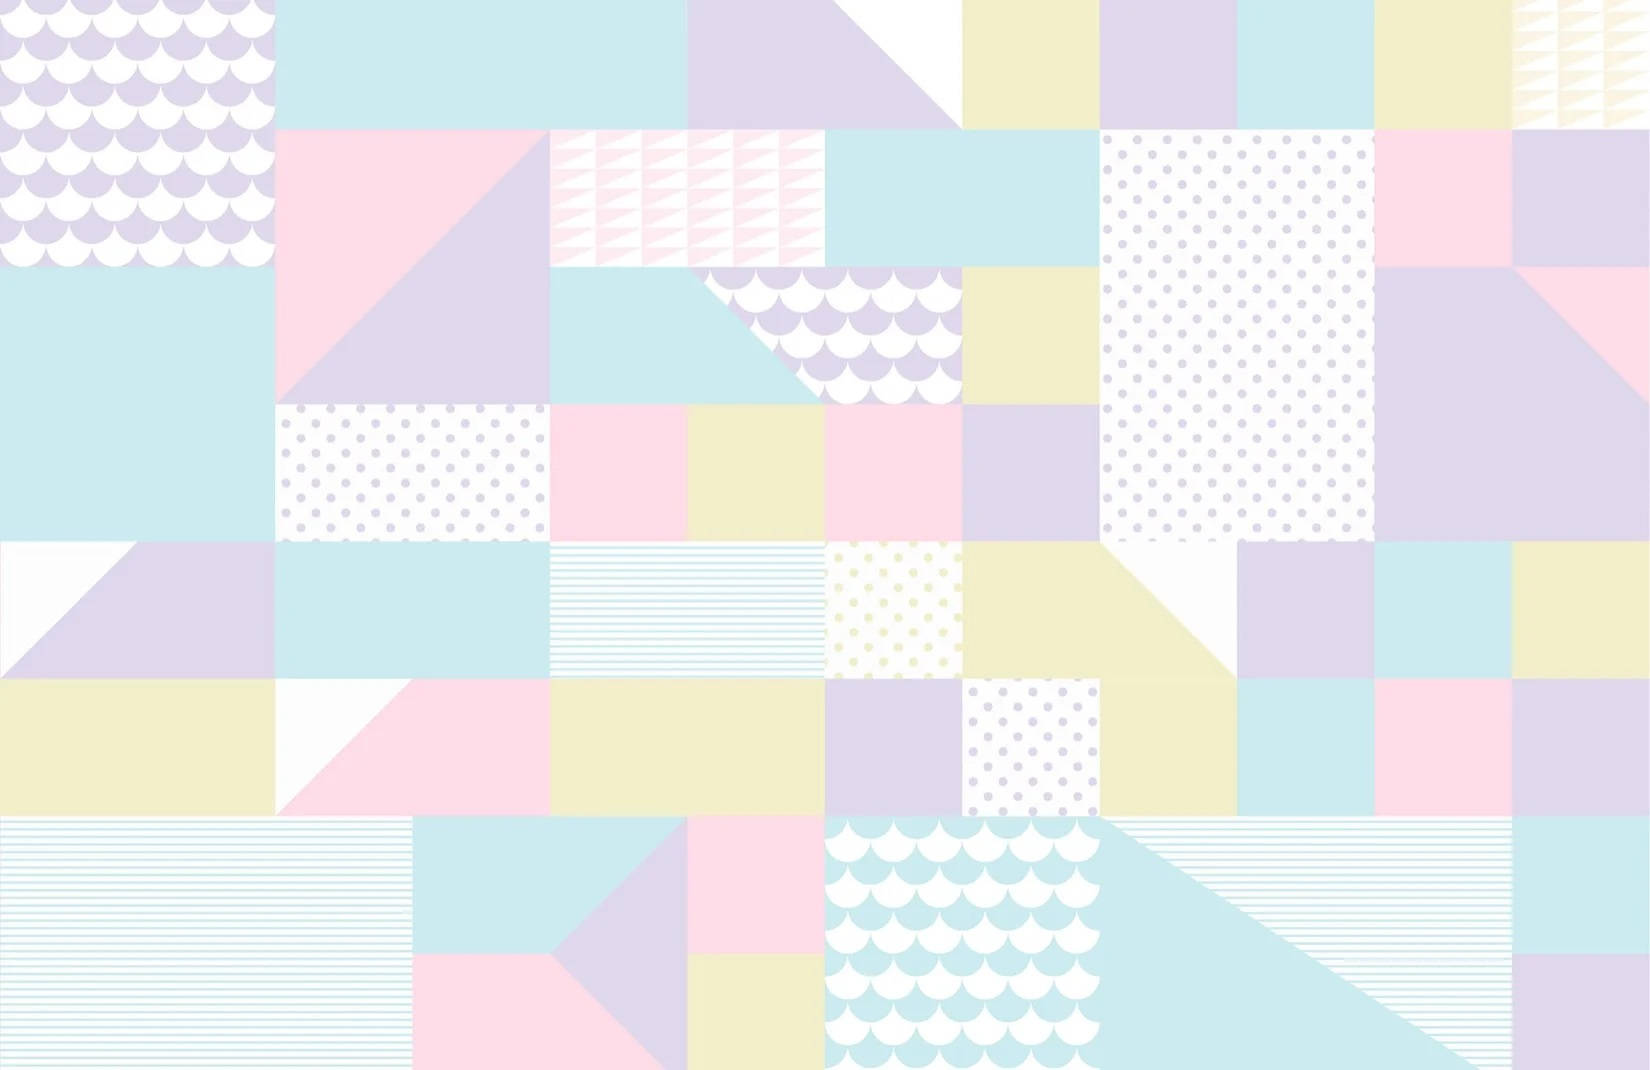 Captivating Artistry in Geometric Abstract Pastel Colors Wallpaper